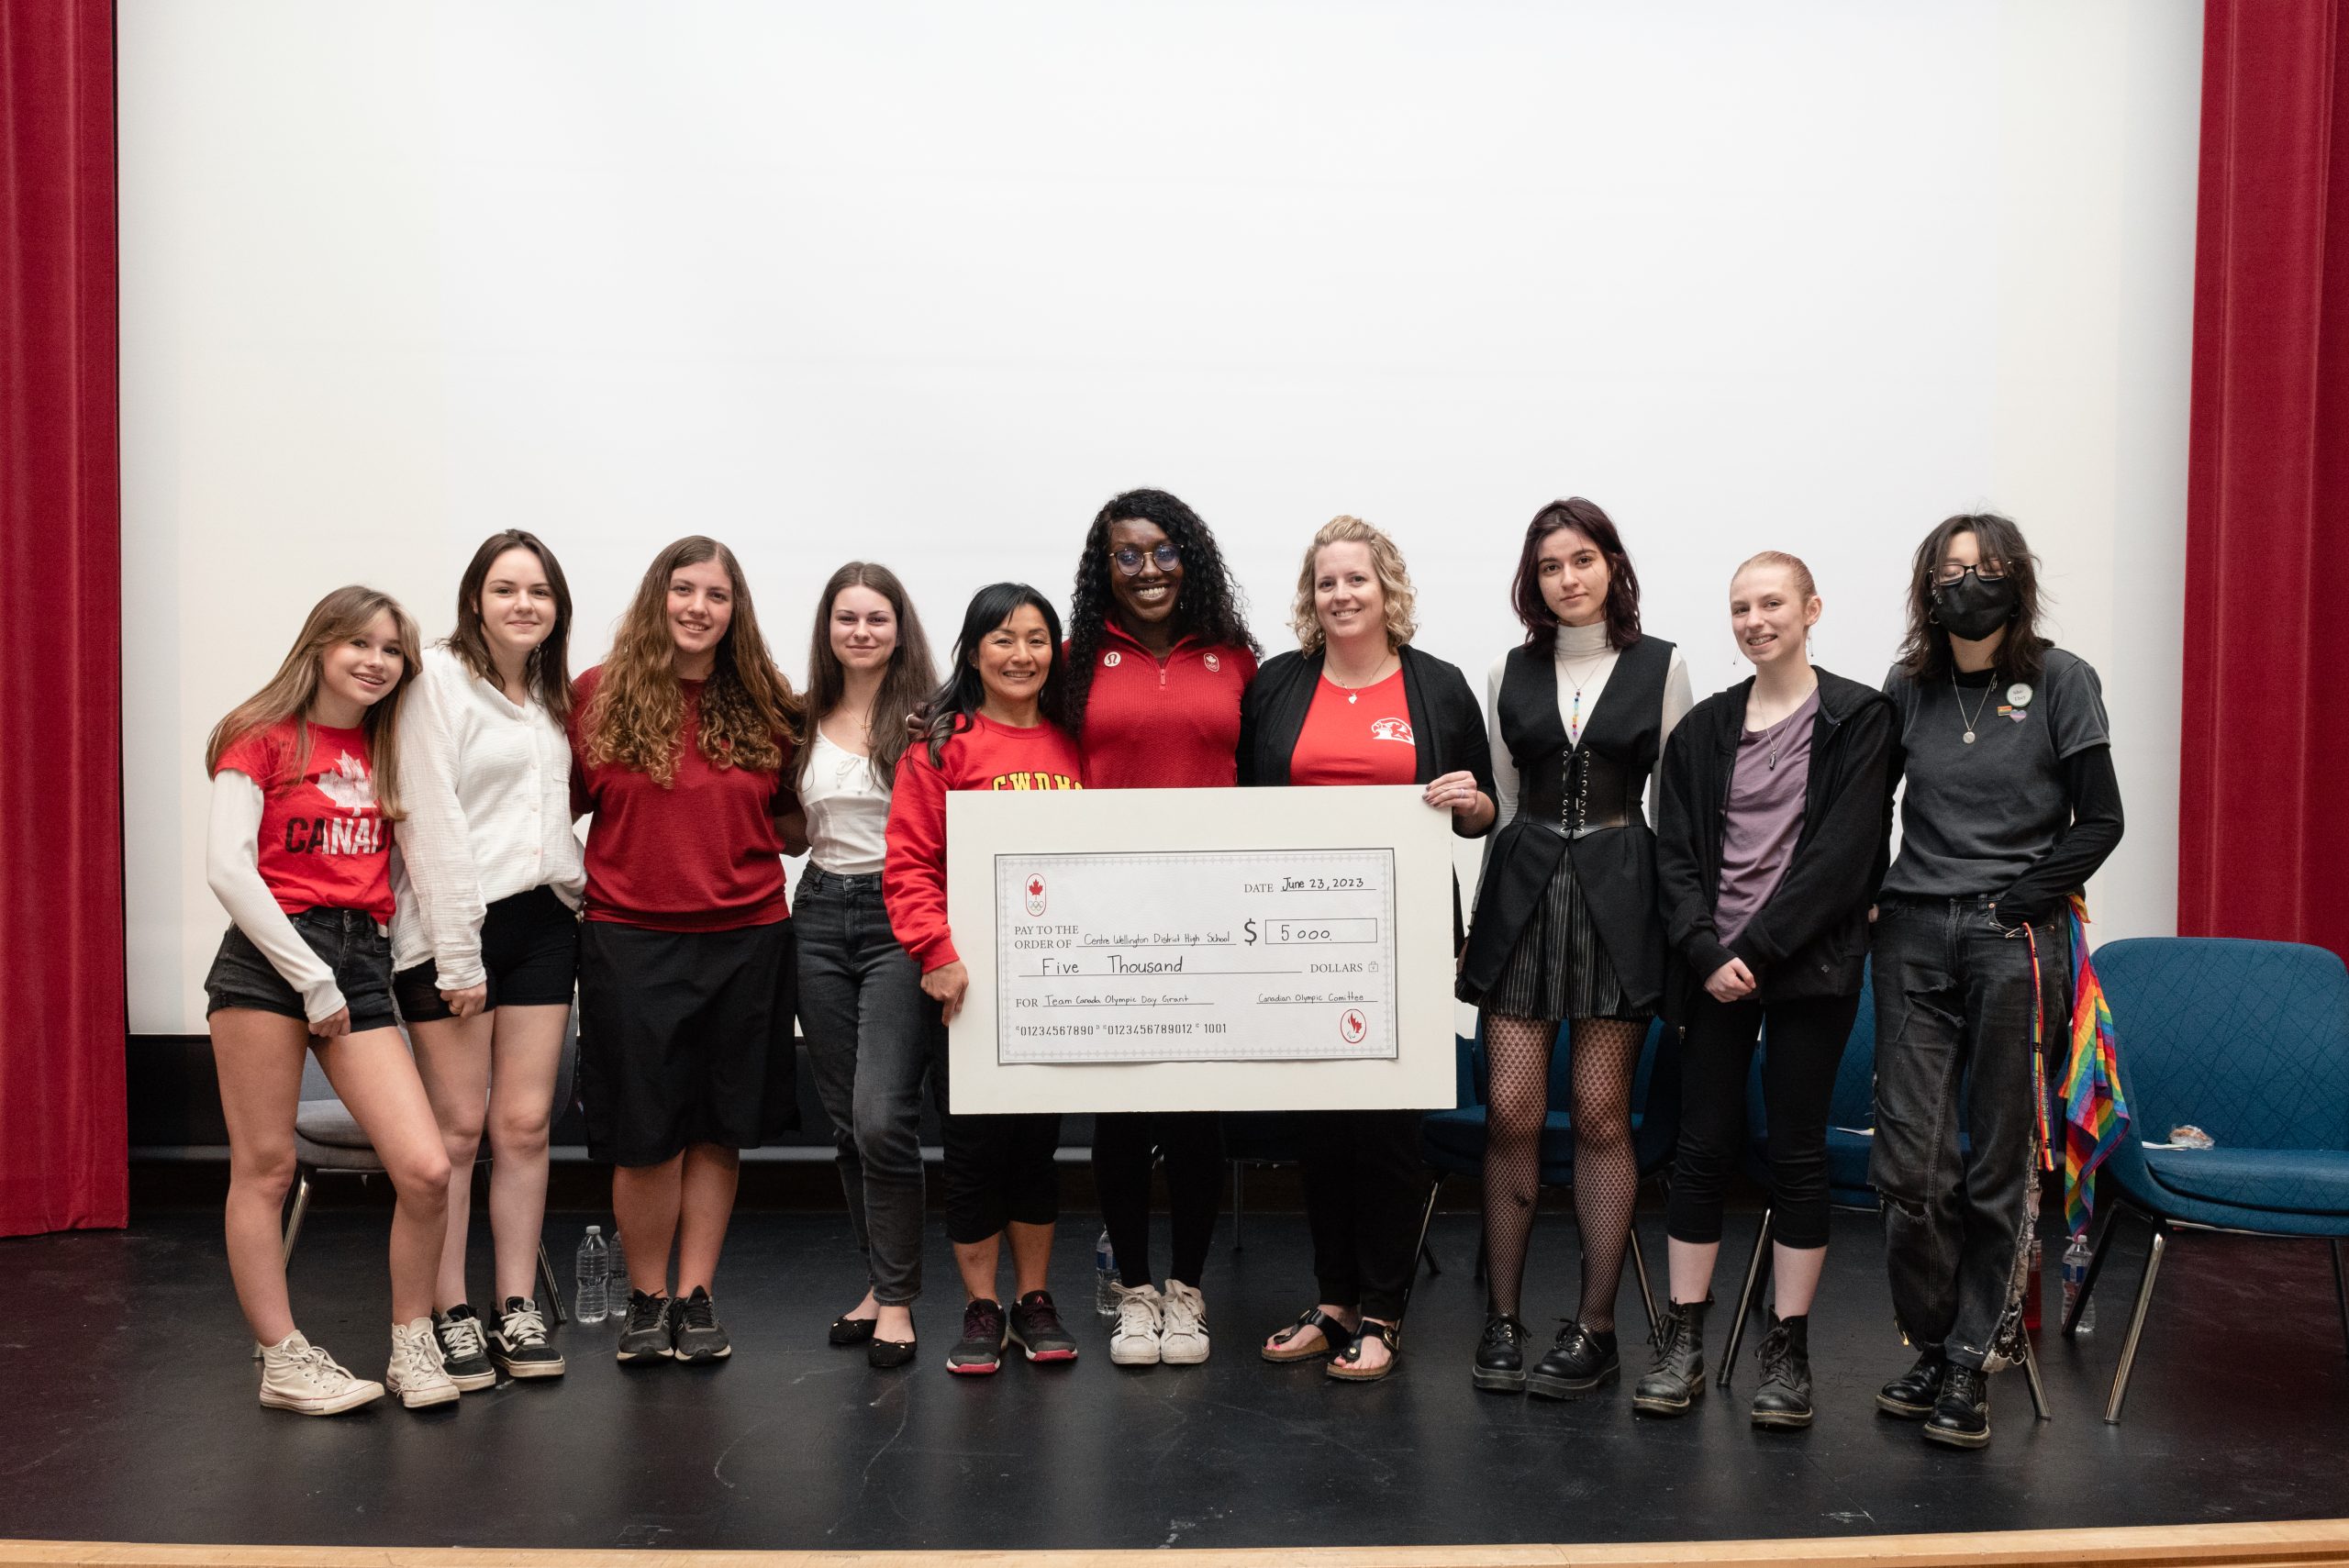 This photo features Cynthia Appiah and students posing with large grant cheque. 